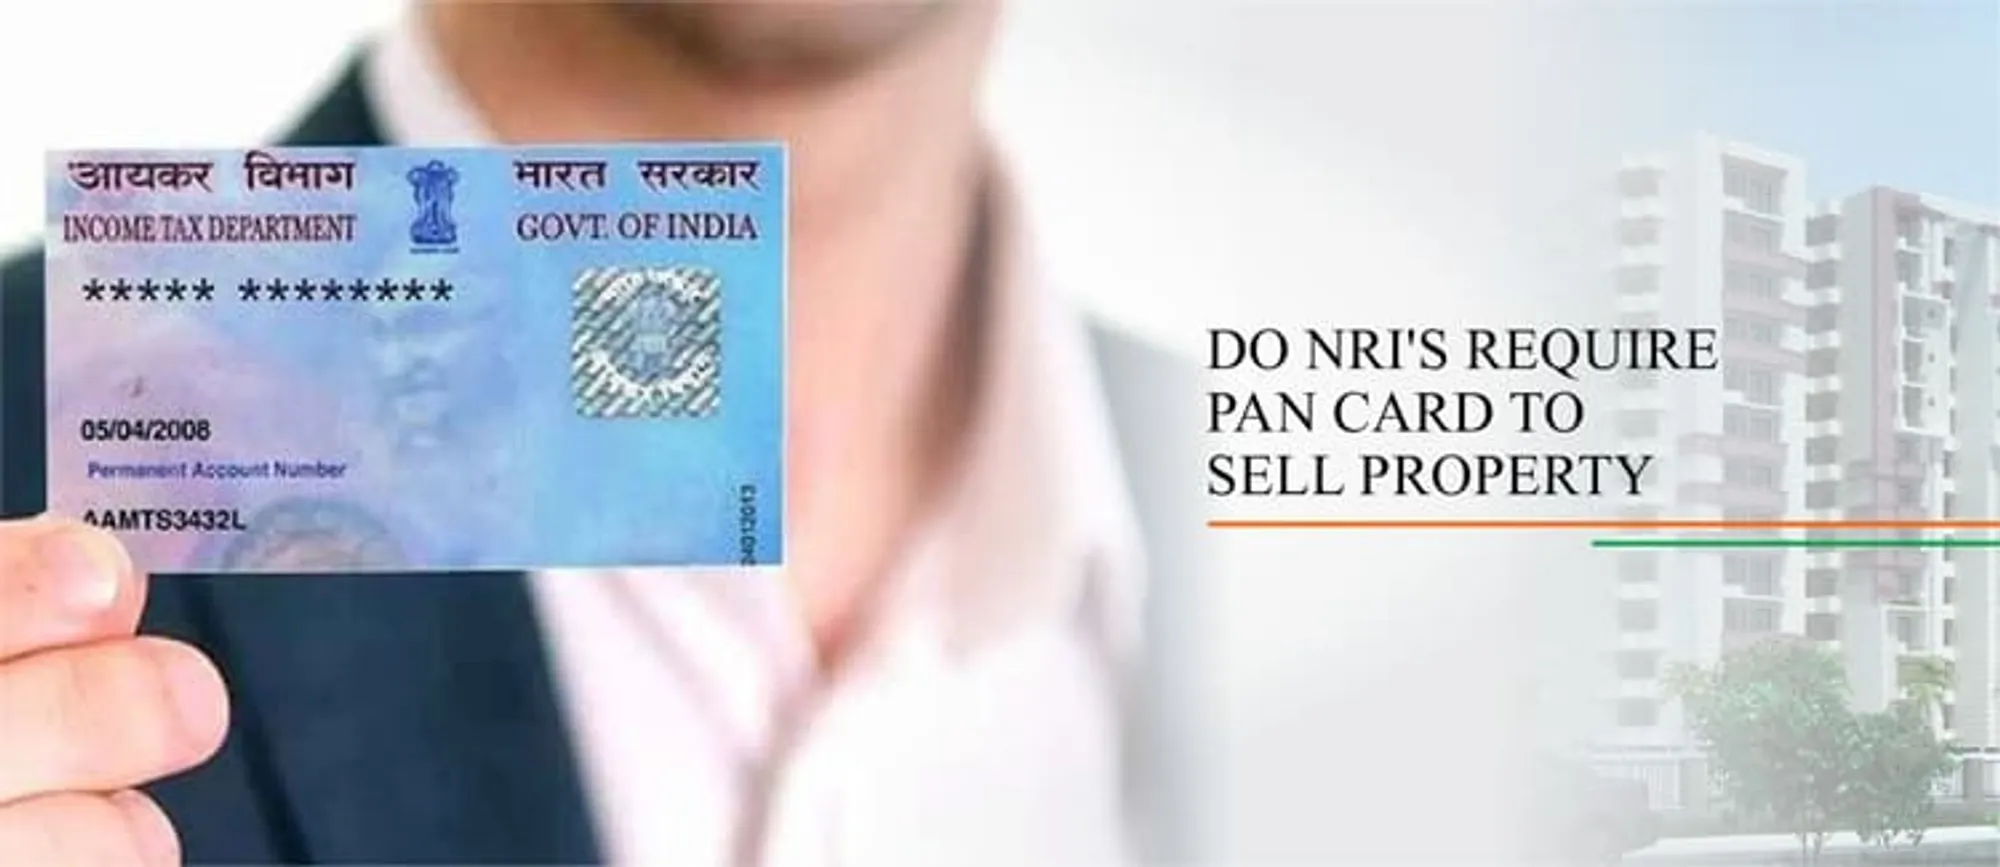 Pan Card for Sell Property in India